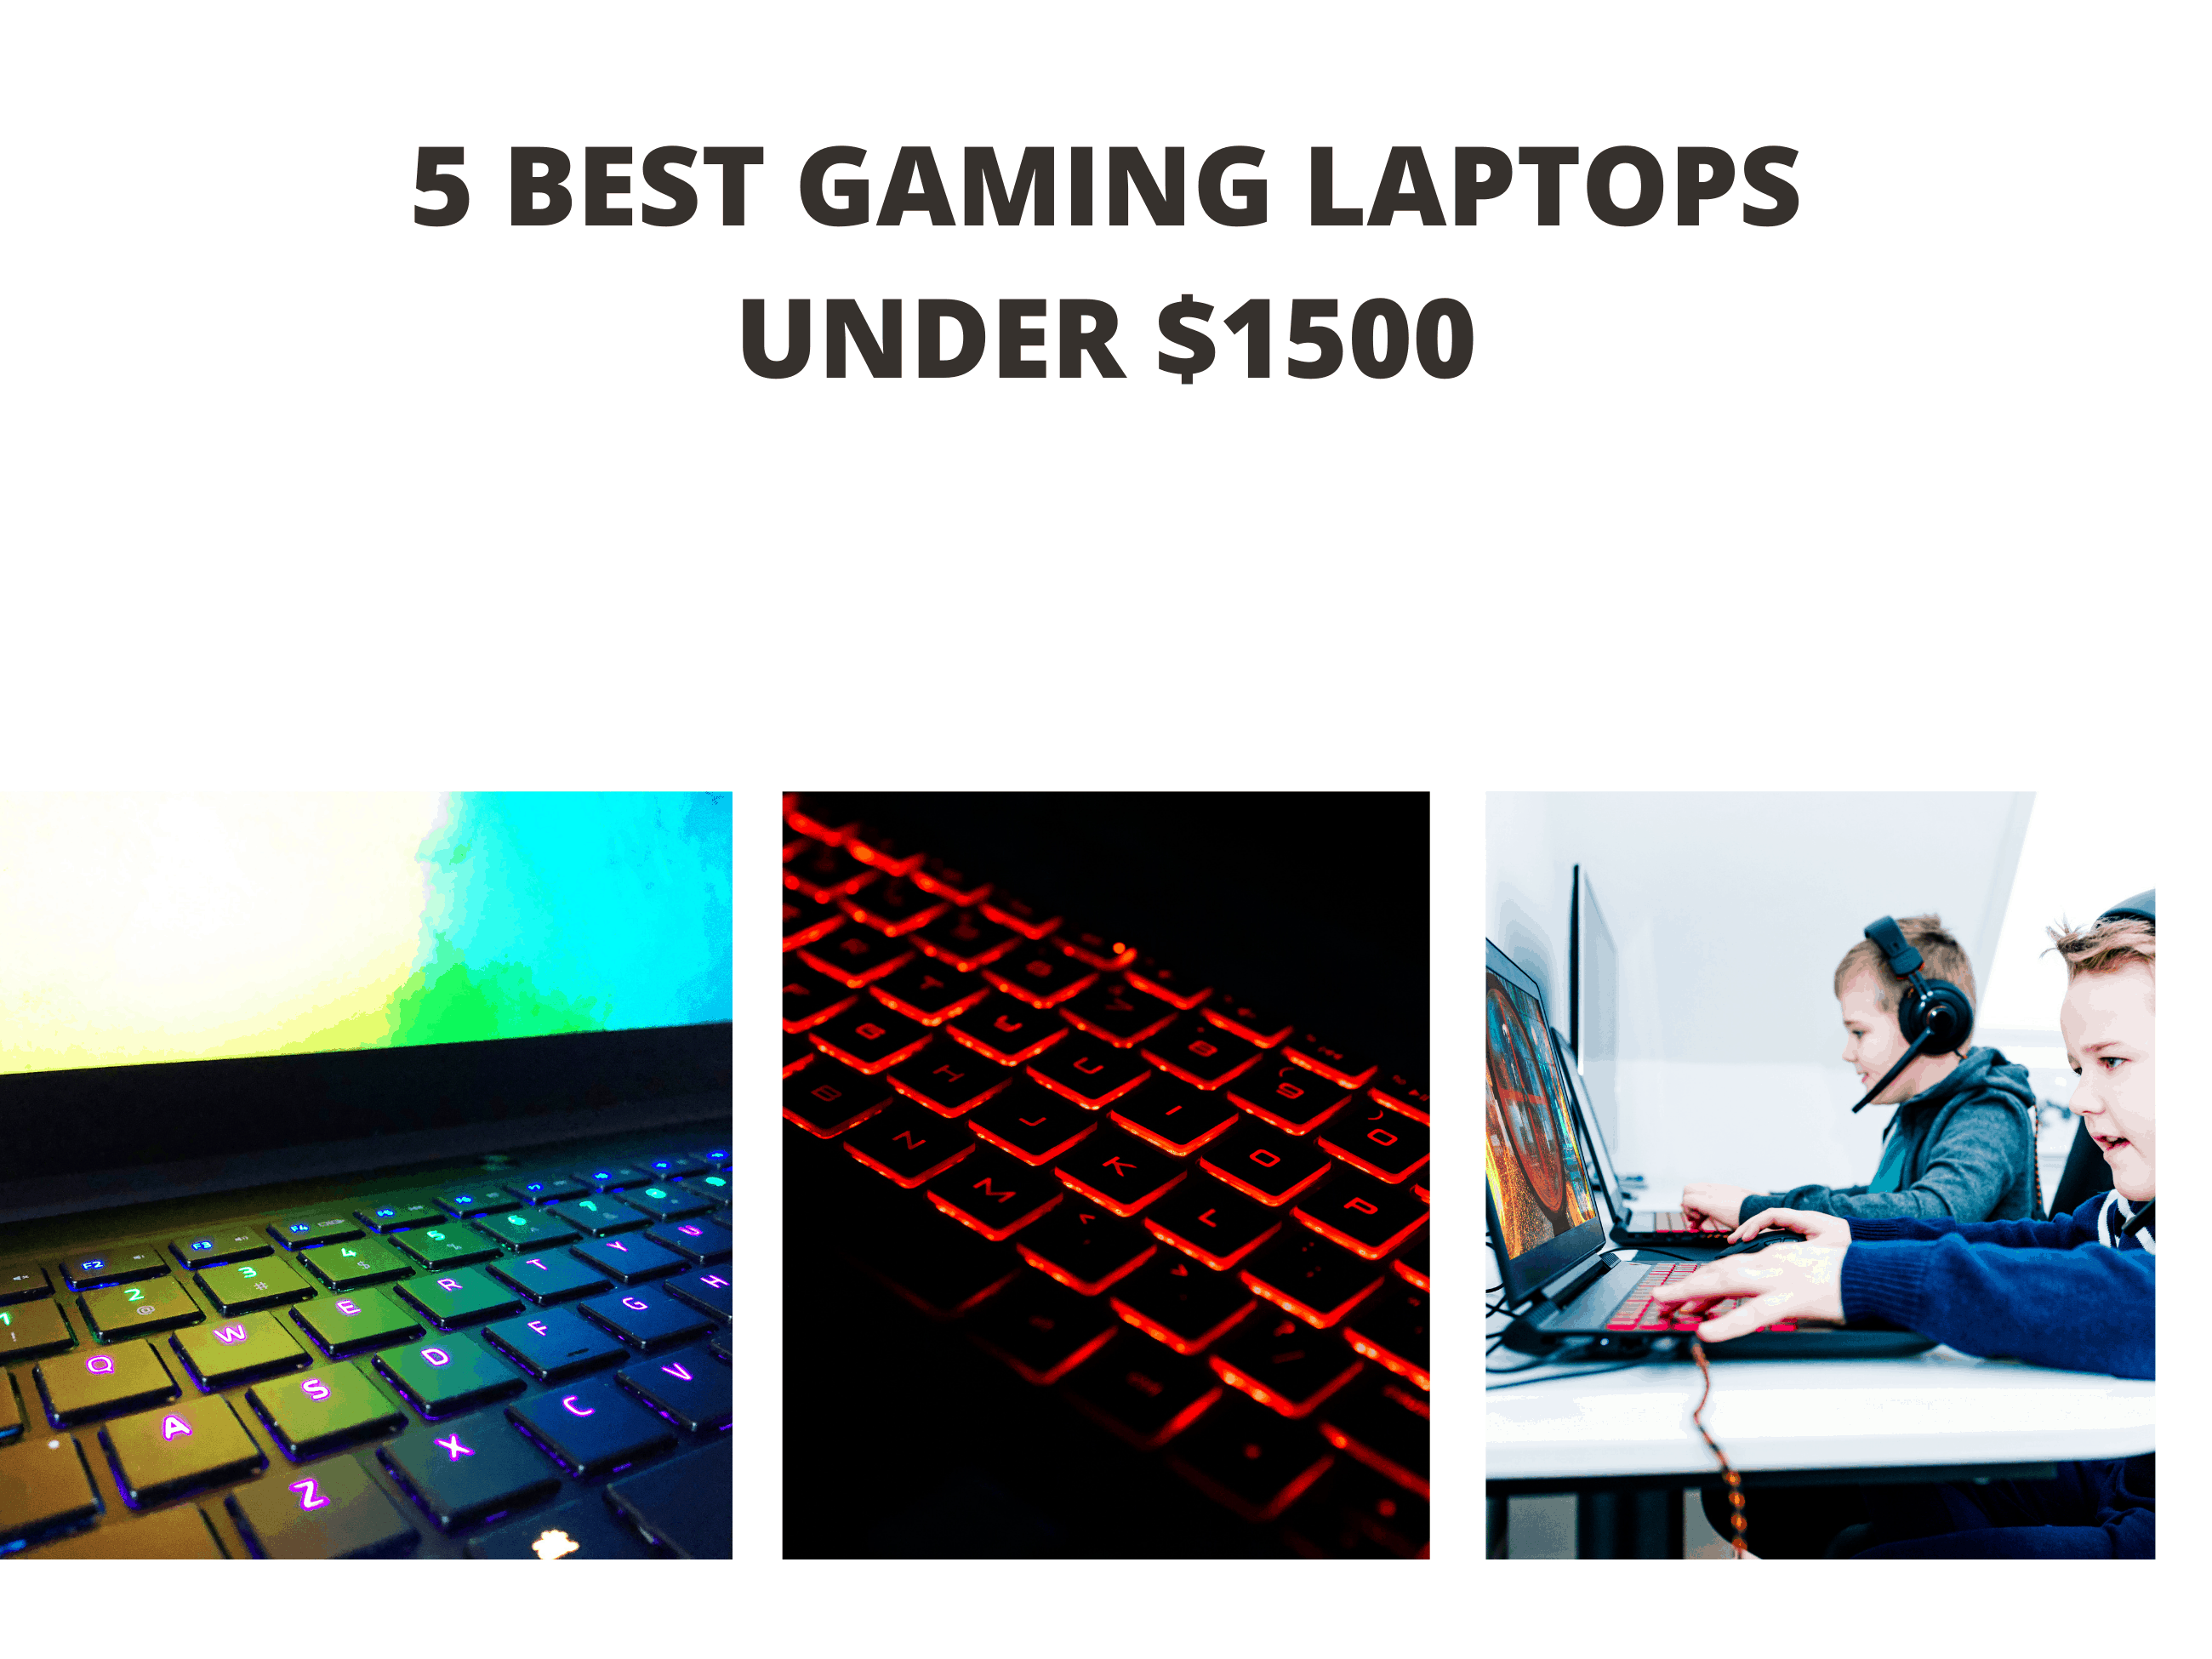 5 Best Gaming Laptops under $1500 (2022 reviews)